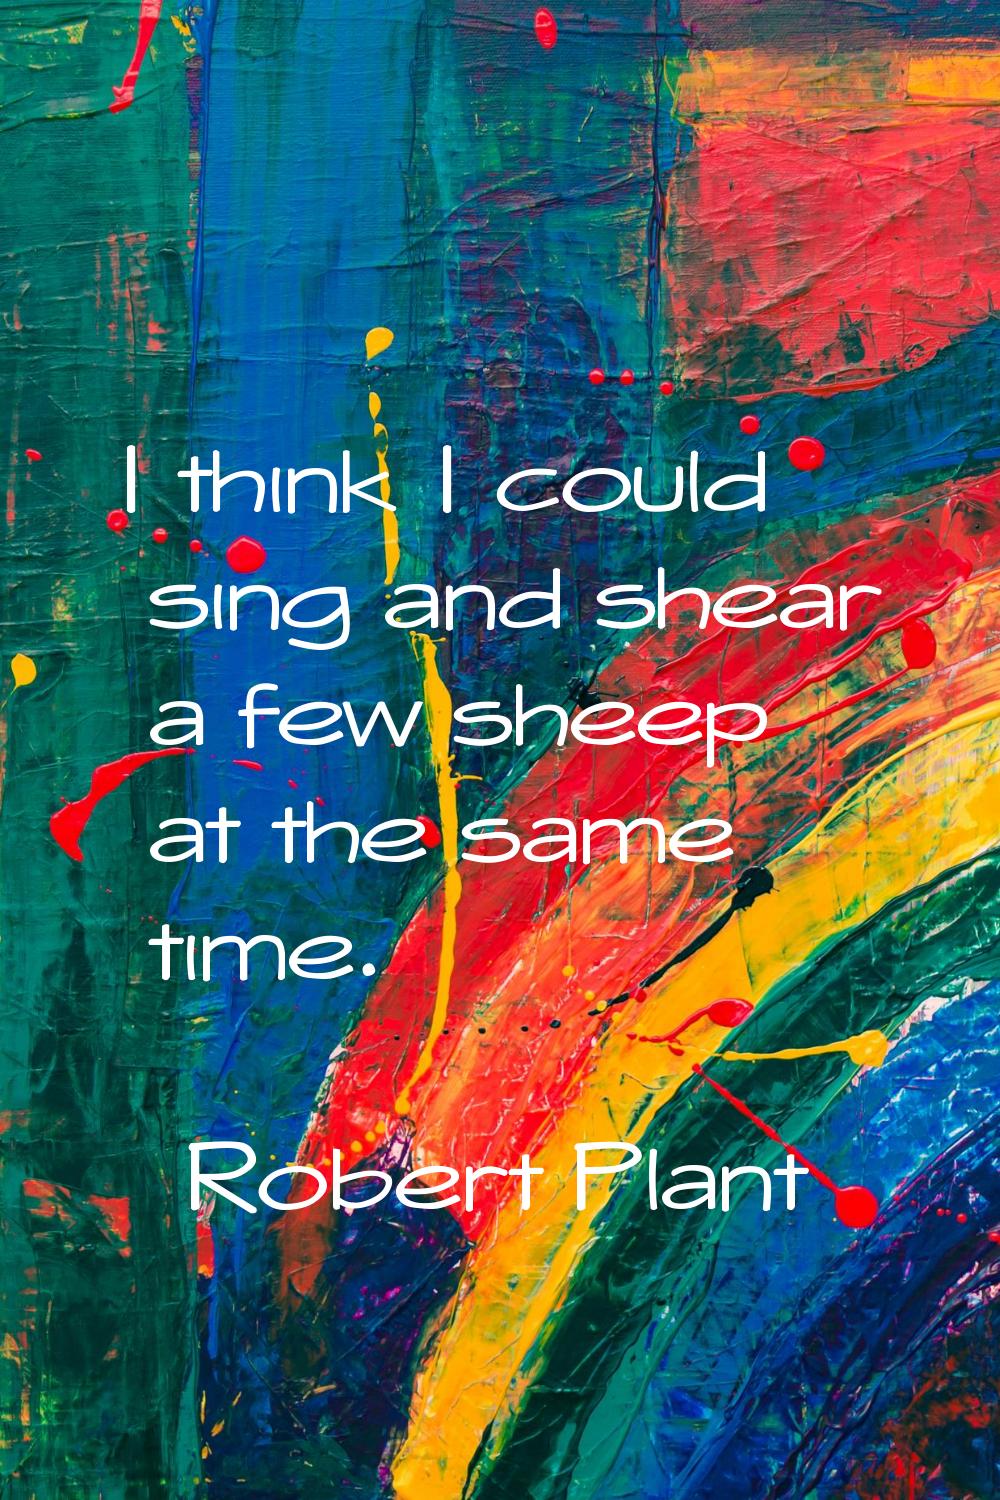 I think I could sing and shear a few sheep at the same time.